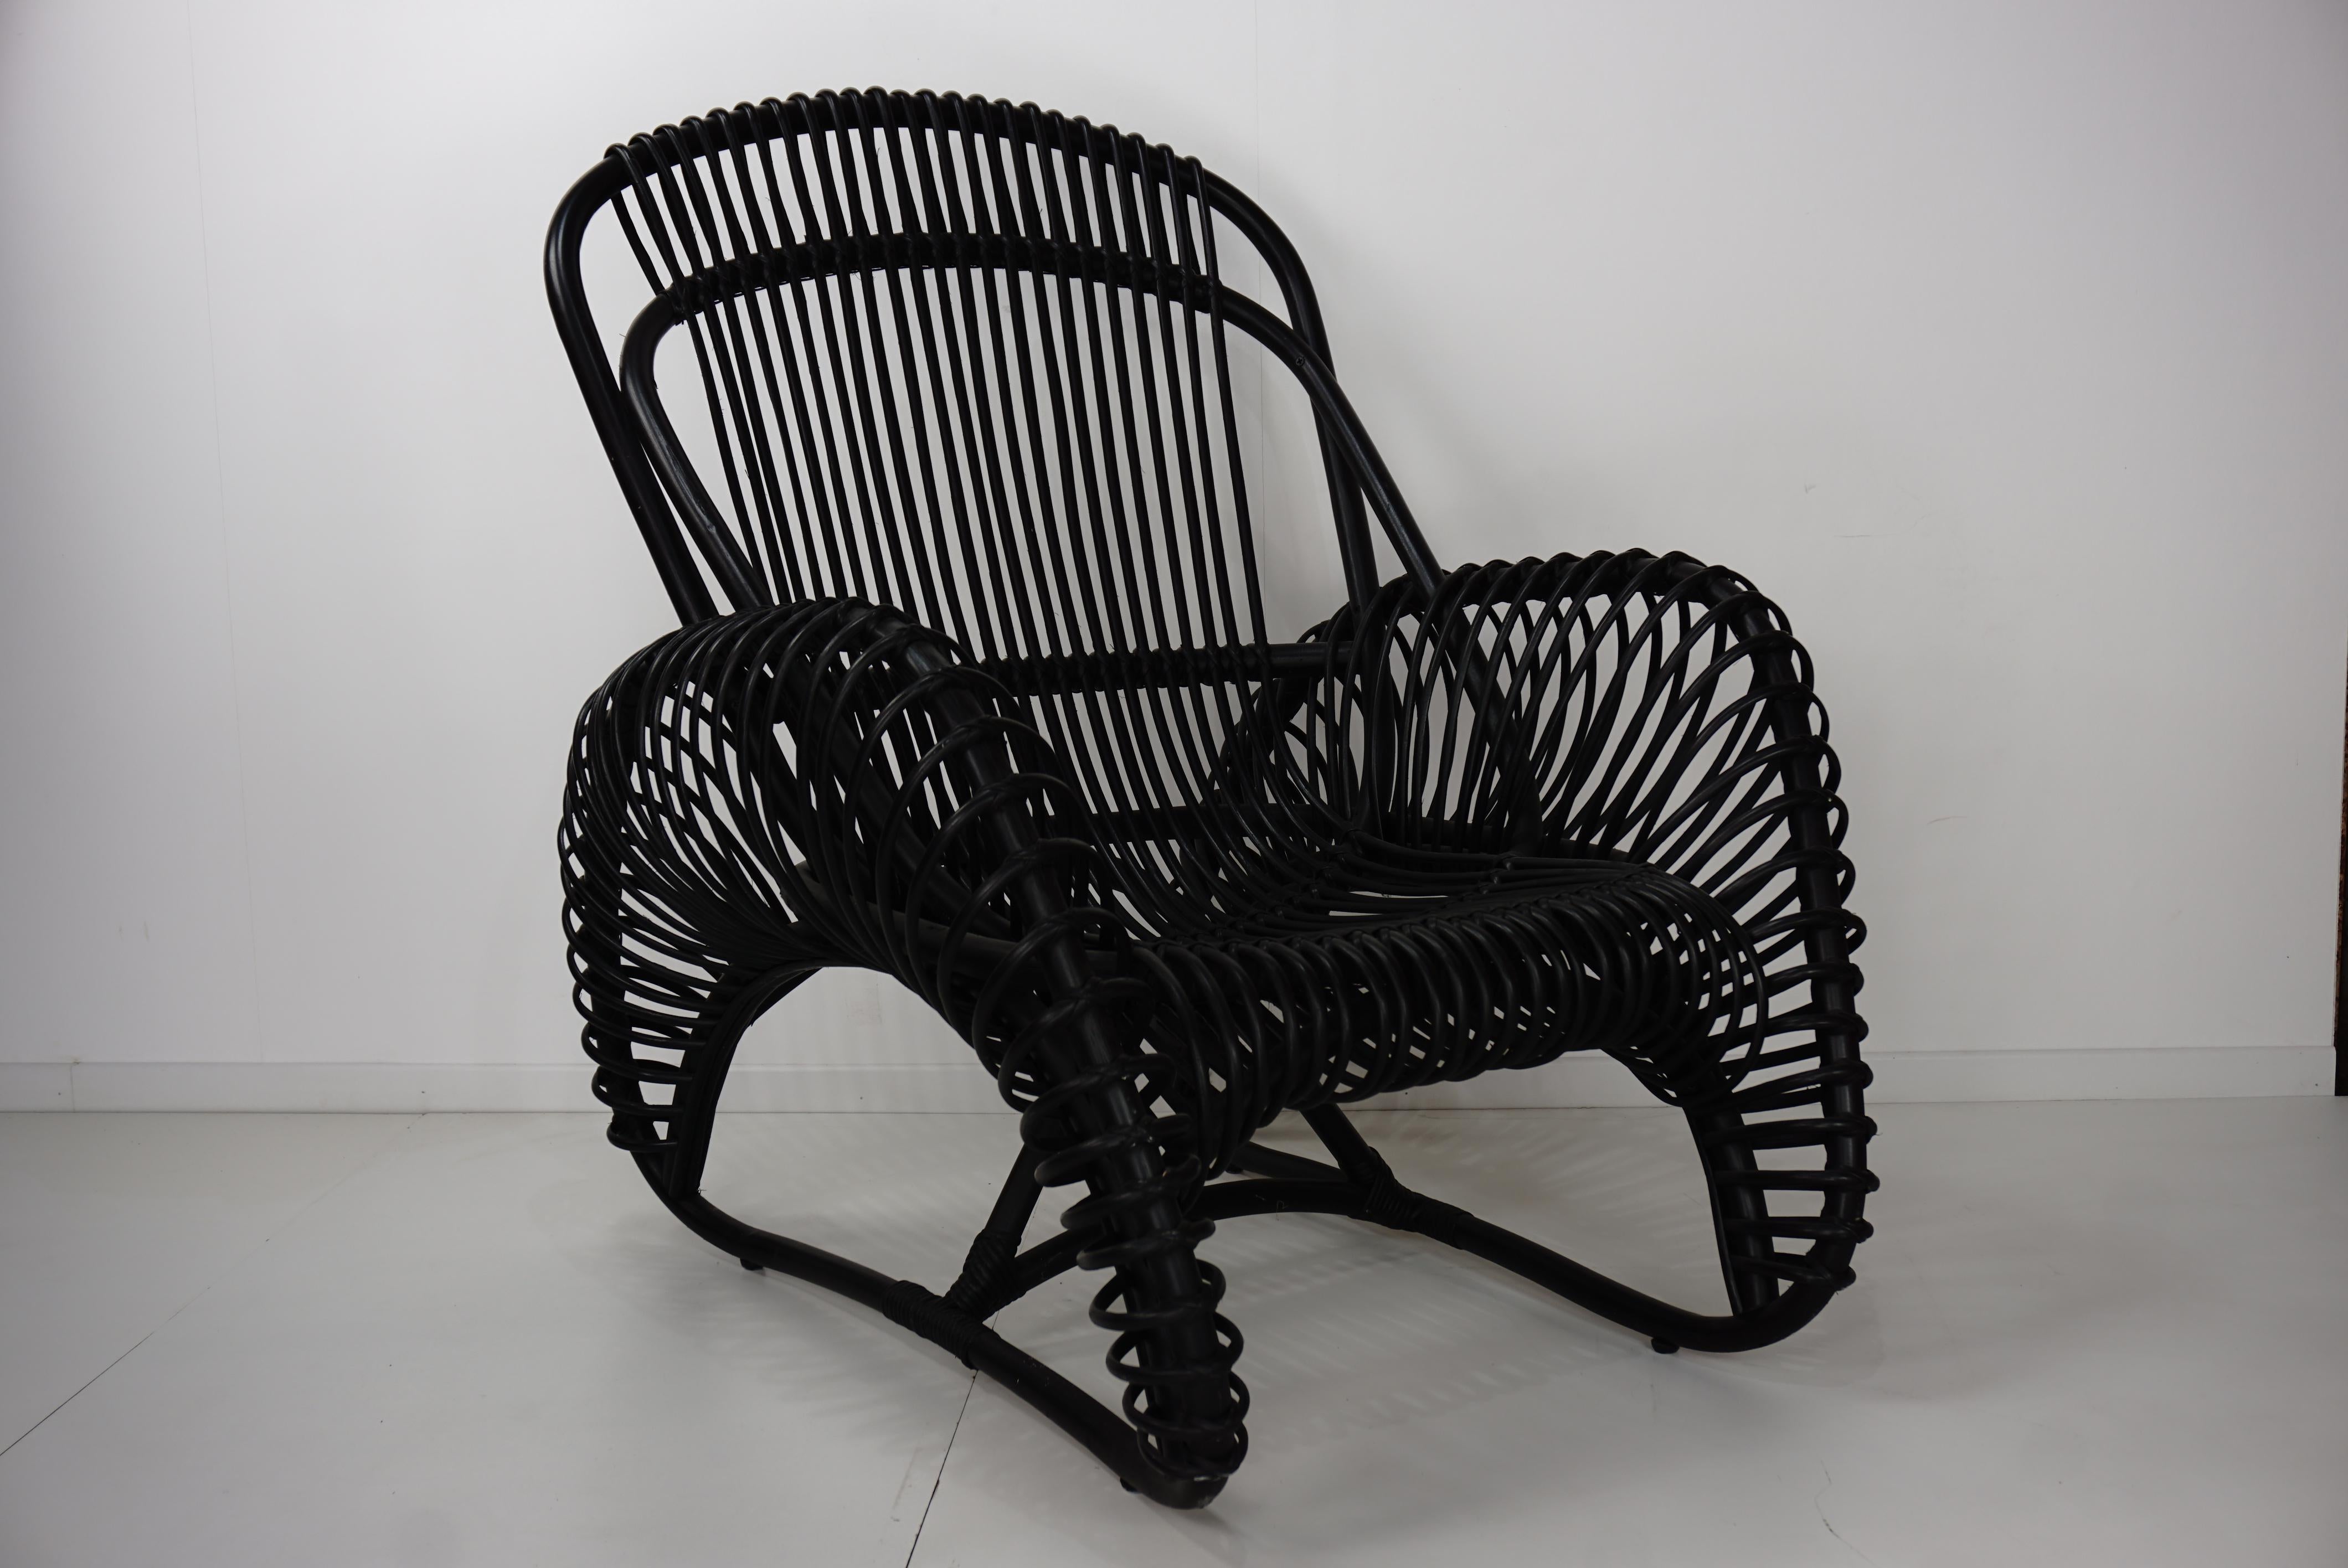 French design black rattan lounger armchair midcentury vintage look and resolutely contemporary, this lounger armchair in black lacquered rattan is wonderful, poetic and airy.